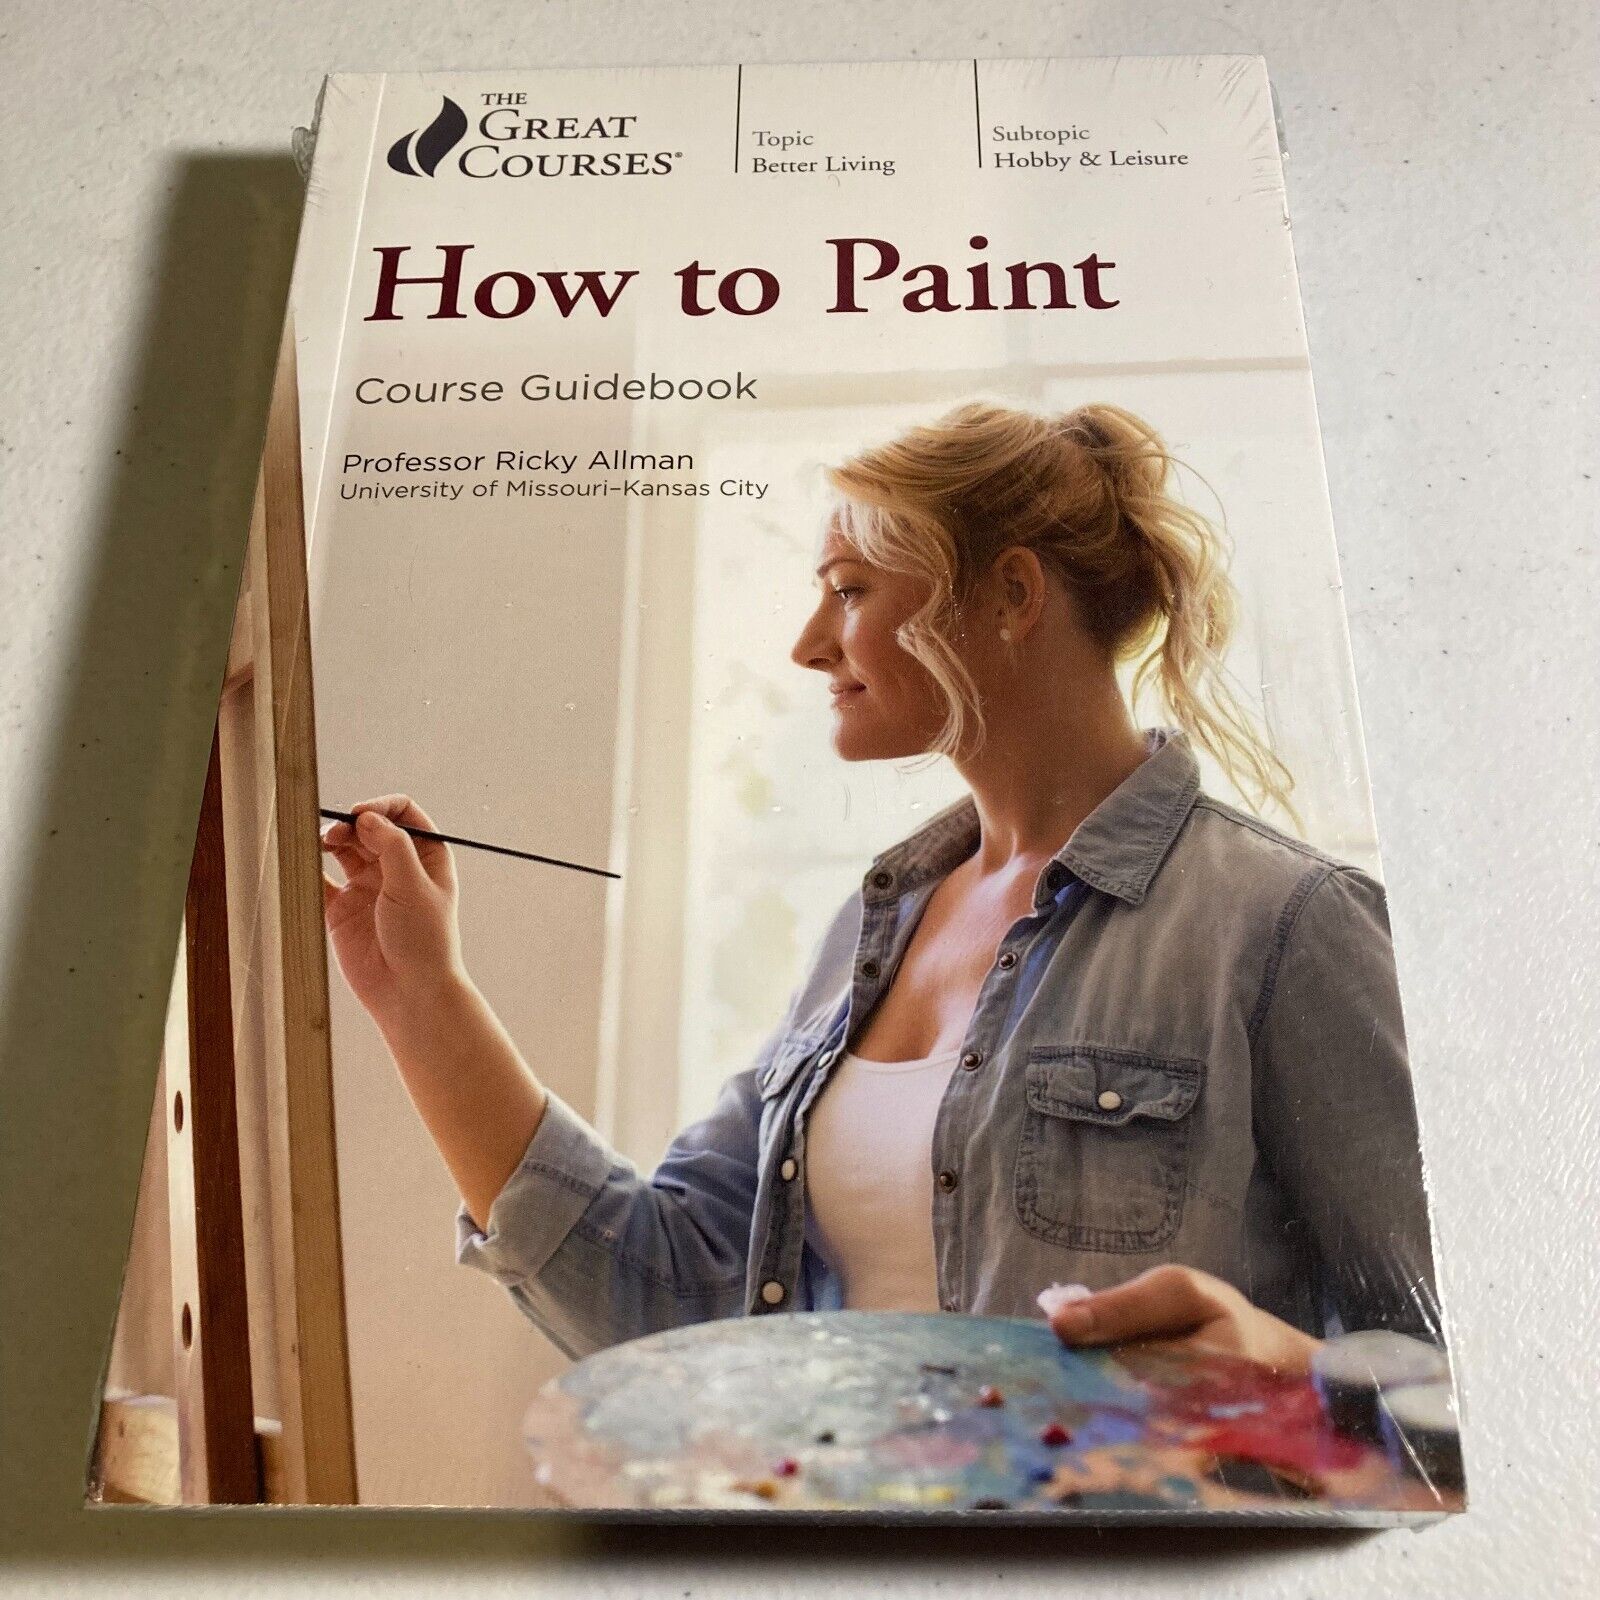 How to Paint The Great Courses 4 dvd set and guidebook Artist Art of Painting